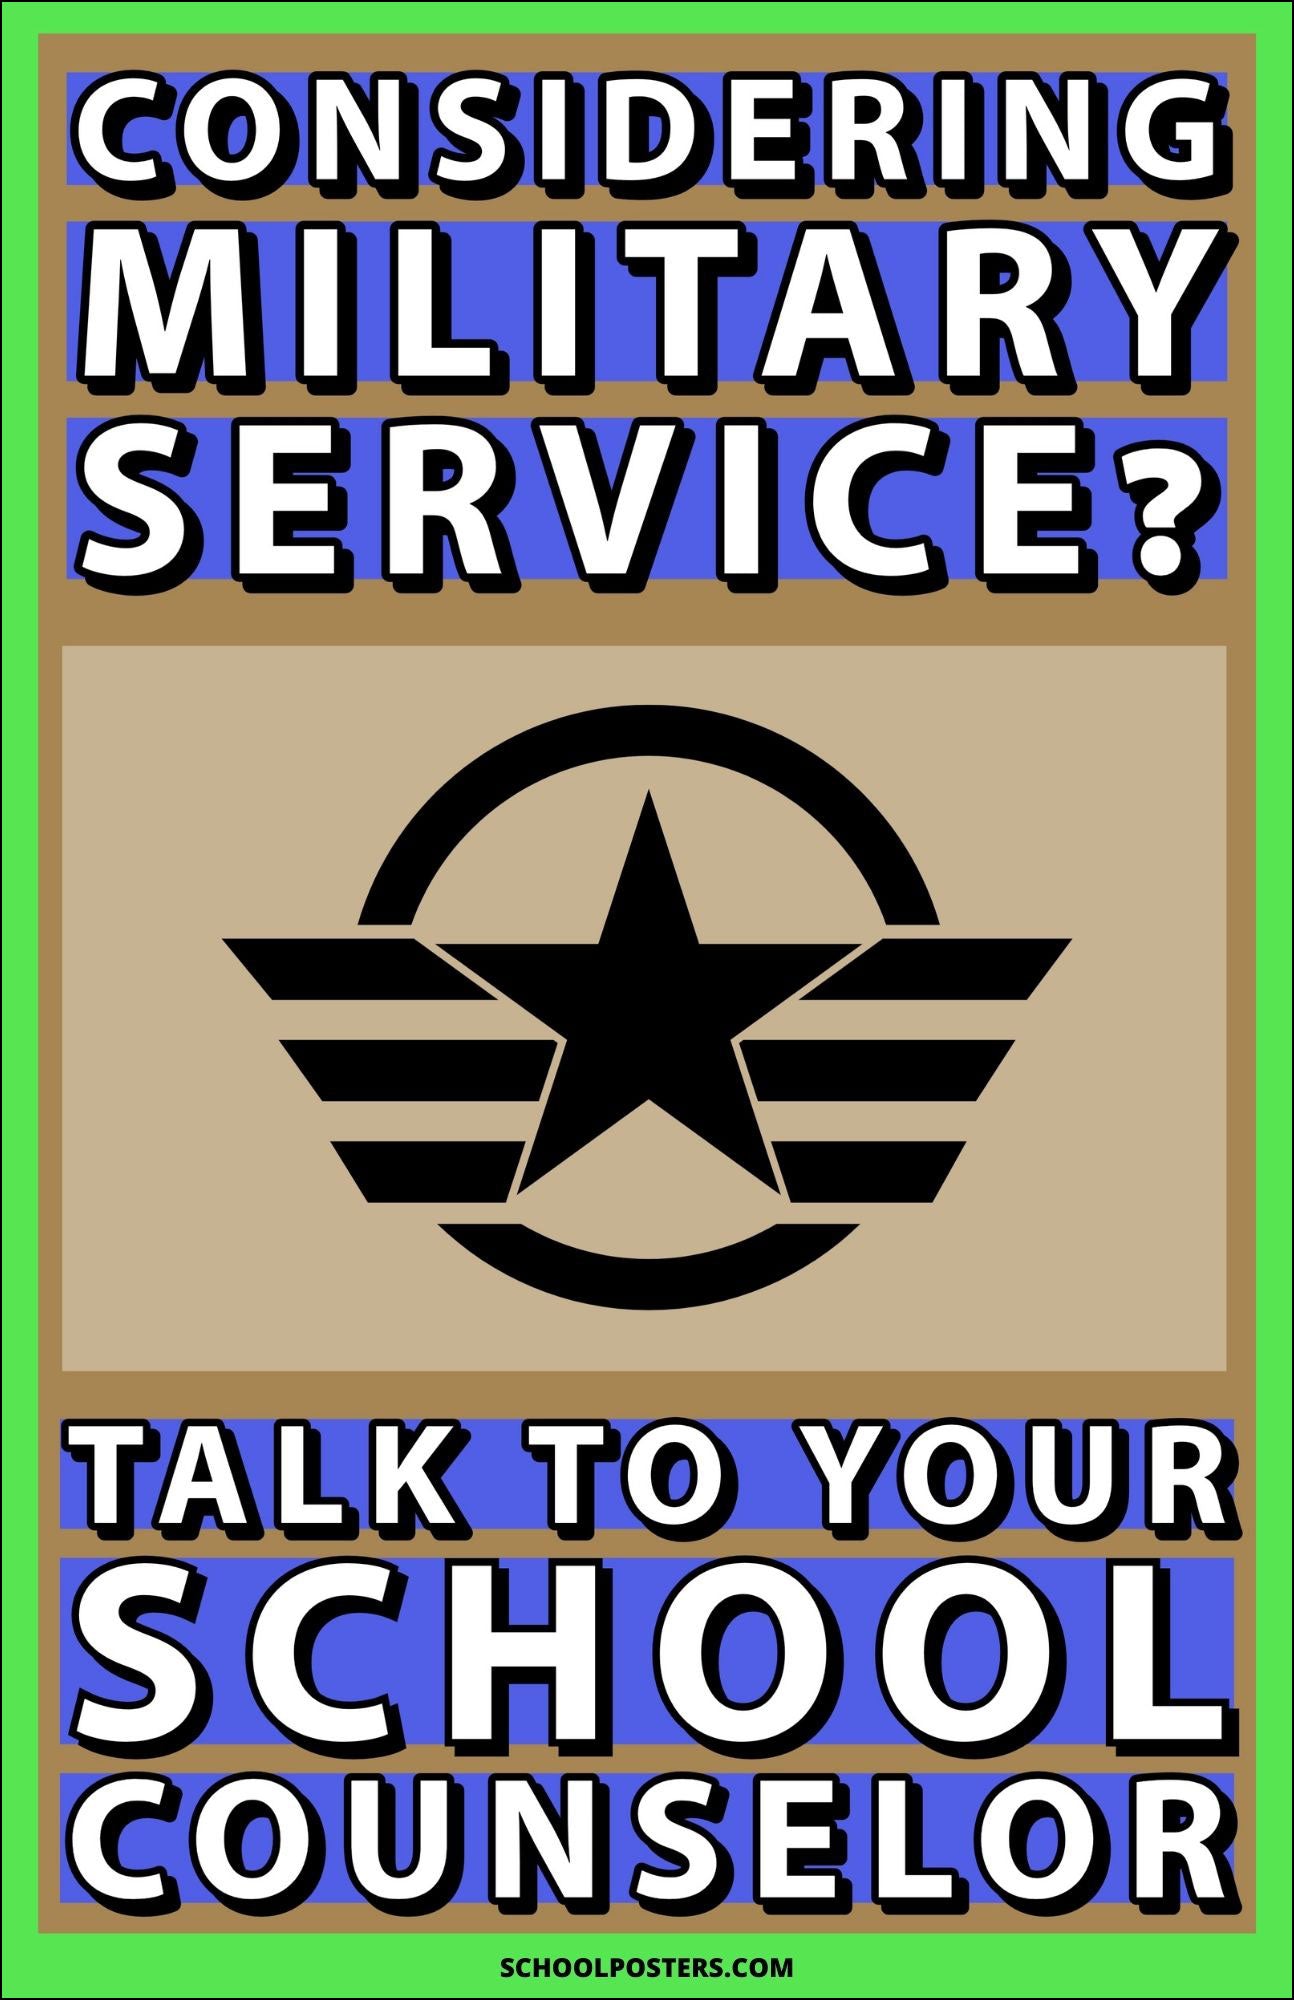 School Counselor Military Service Poster